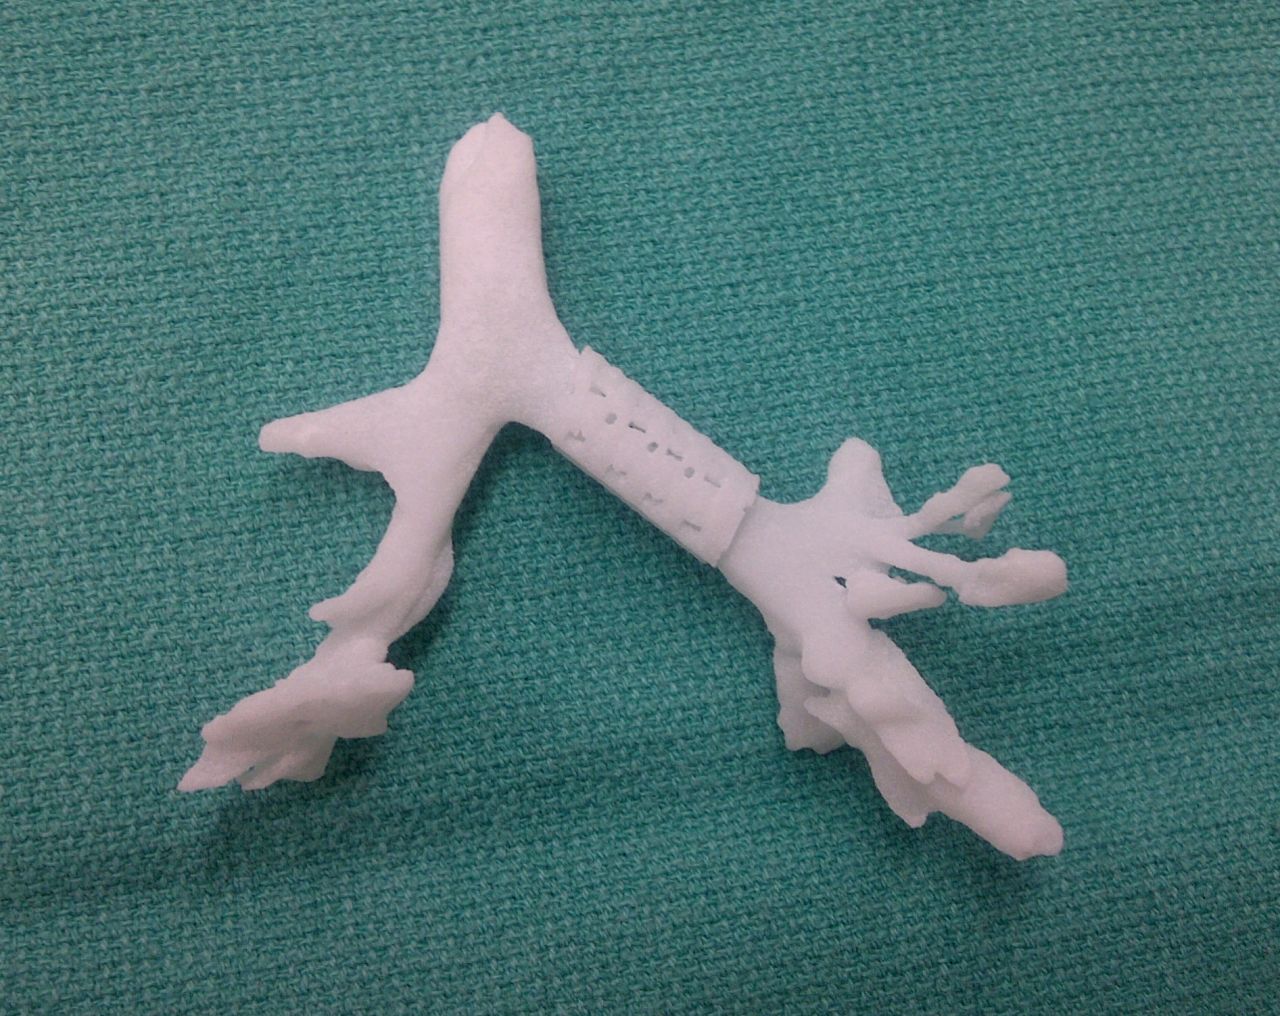 A model of Kaiba's airway, with the biological stent in place.